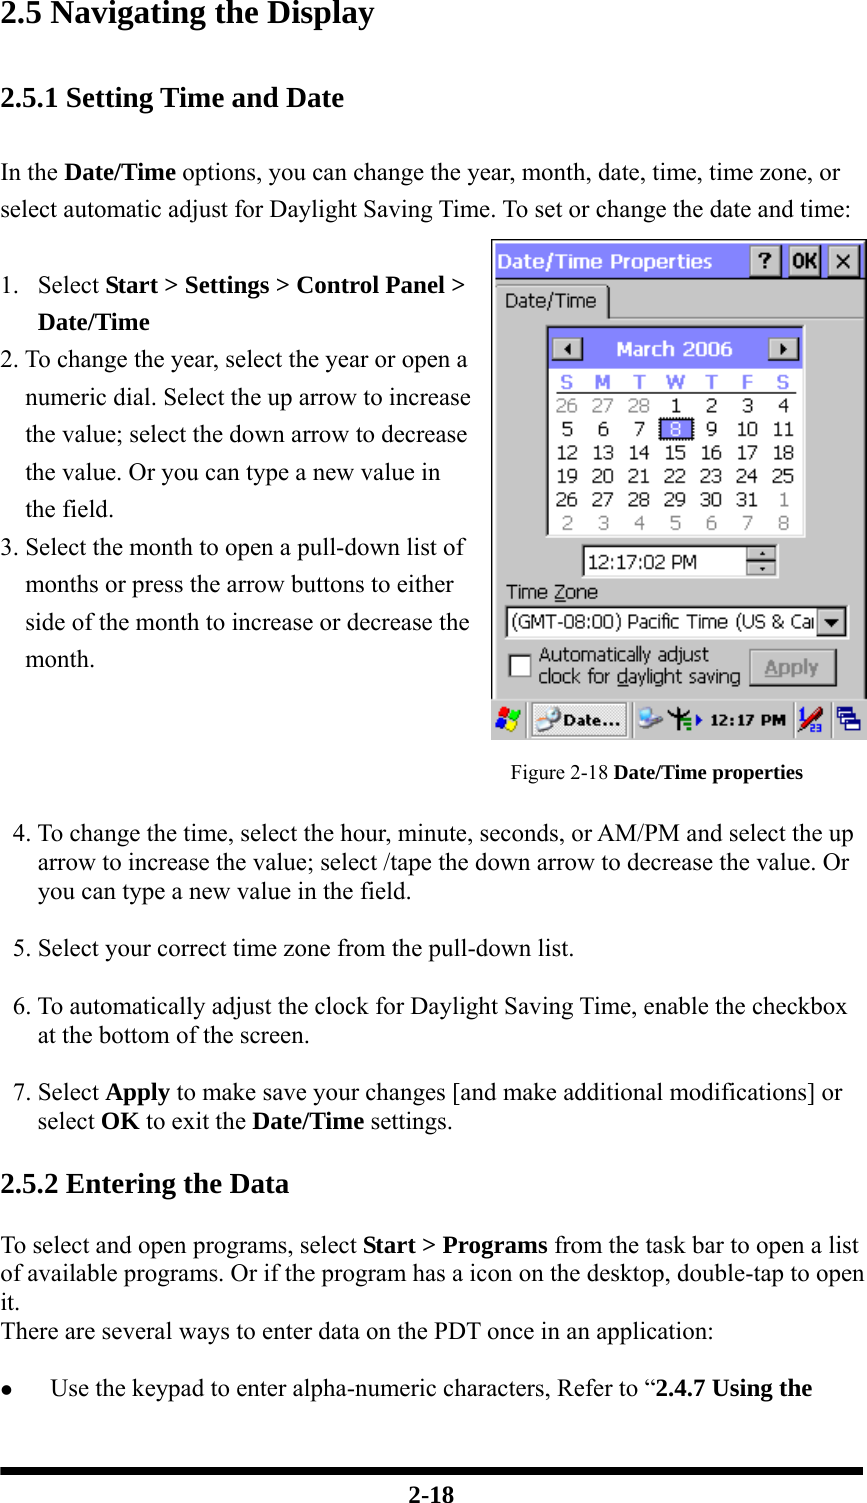  2-18 2.5 Navigating the Display  2.5.1 Setting Time and Date  In the Date/Time options, you can change the year, month, date, time, time zone, or select automatic adjust for Daylight Saving Time. To set or change the date and time:  1. Select Start &gt; Settings &gt; Control Panel &gt; Date/Time 2. To change the year, select the year or open a numeric dial. Select the up arrow to increase the value; select the down arrow to decrease the value. Or you can type a new value in the field. 3. Select the month to open a pull-down list of months or press the arrow buttons to either side of the month to increase or decrease the month.   Figure 2-18 Date/Time properties    4. To change the time, select the hour, minute, seconds, or AM/PM and select the up arrow to increase the value; select /tape the down arrow to decrease the value. Or you can type a new value in the field.    5. Select your correct time zone from the pull-down list.    6. To automatically adjust the clock for Daylight Saving Time, enable the checkbox at the bottom of the screen.   7. Select Apply to make save your changes [and make additional modifications] or select OK to exit the Date/Time settings.  2.5.2 Entering the Data  To select and open programs, select Start &gt; Programs from the task bar to open a list of available programs. Or if the program has a icon on the desktop, double-tap to open it. There are several ways to enter data on the PDT once in an application:  z Use the keypad to enter alpha-numeric characters, Refer to “2.4.7 Using the 